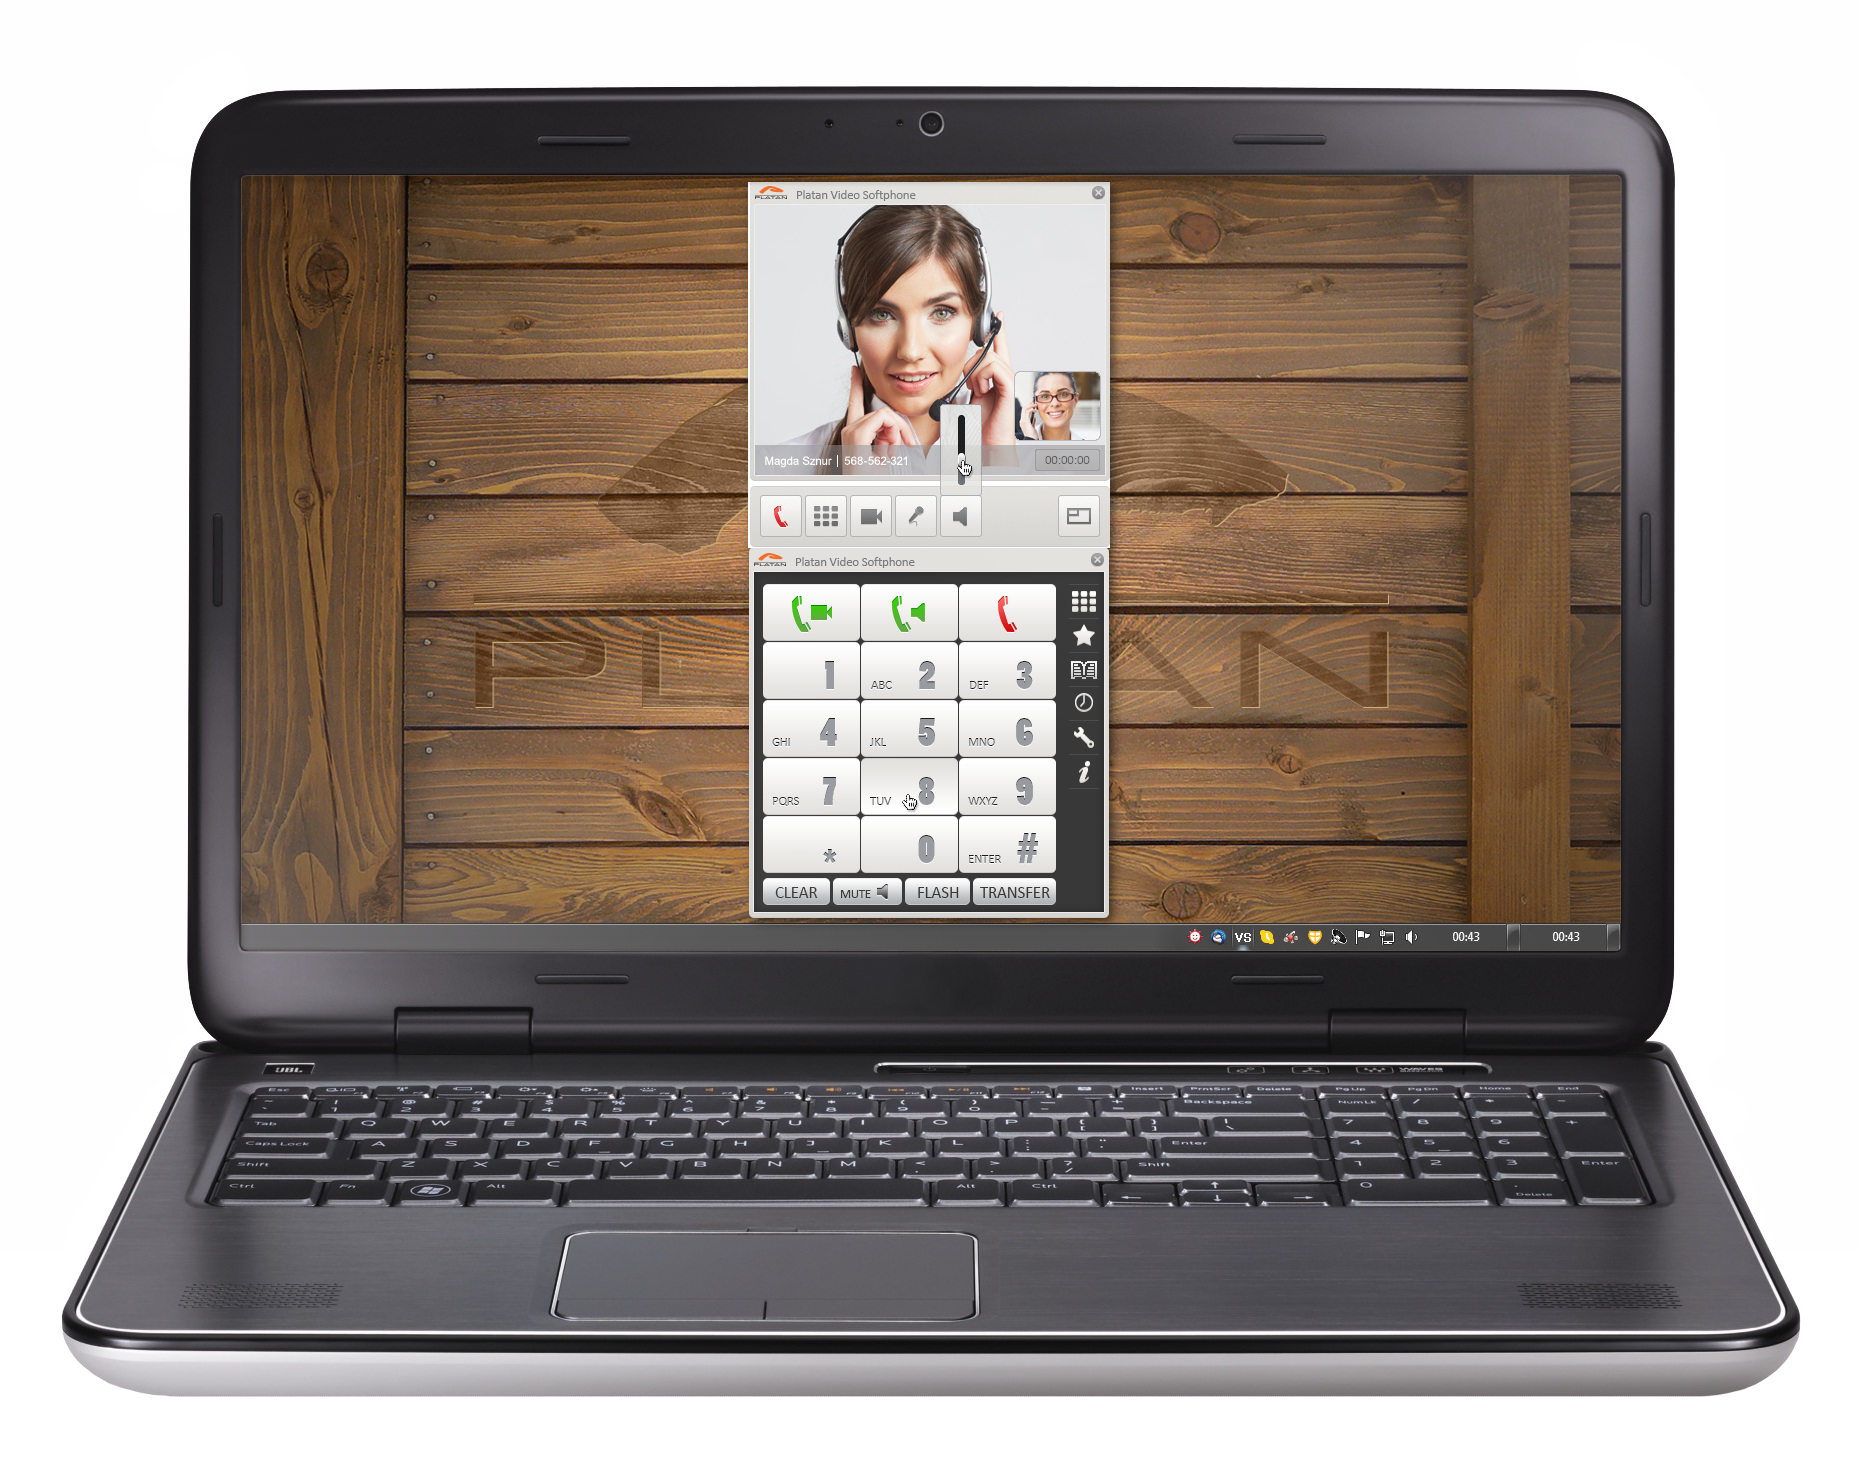 Platan Video Softphone - application to support video calls